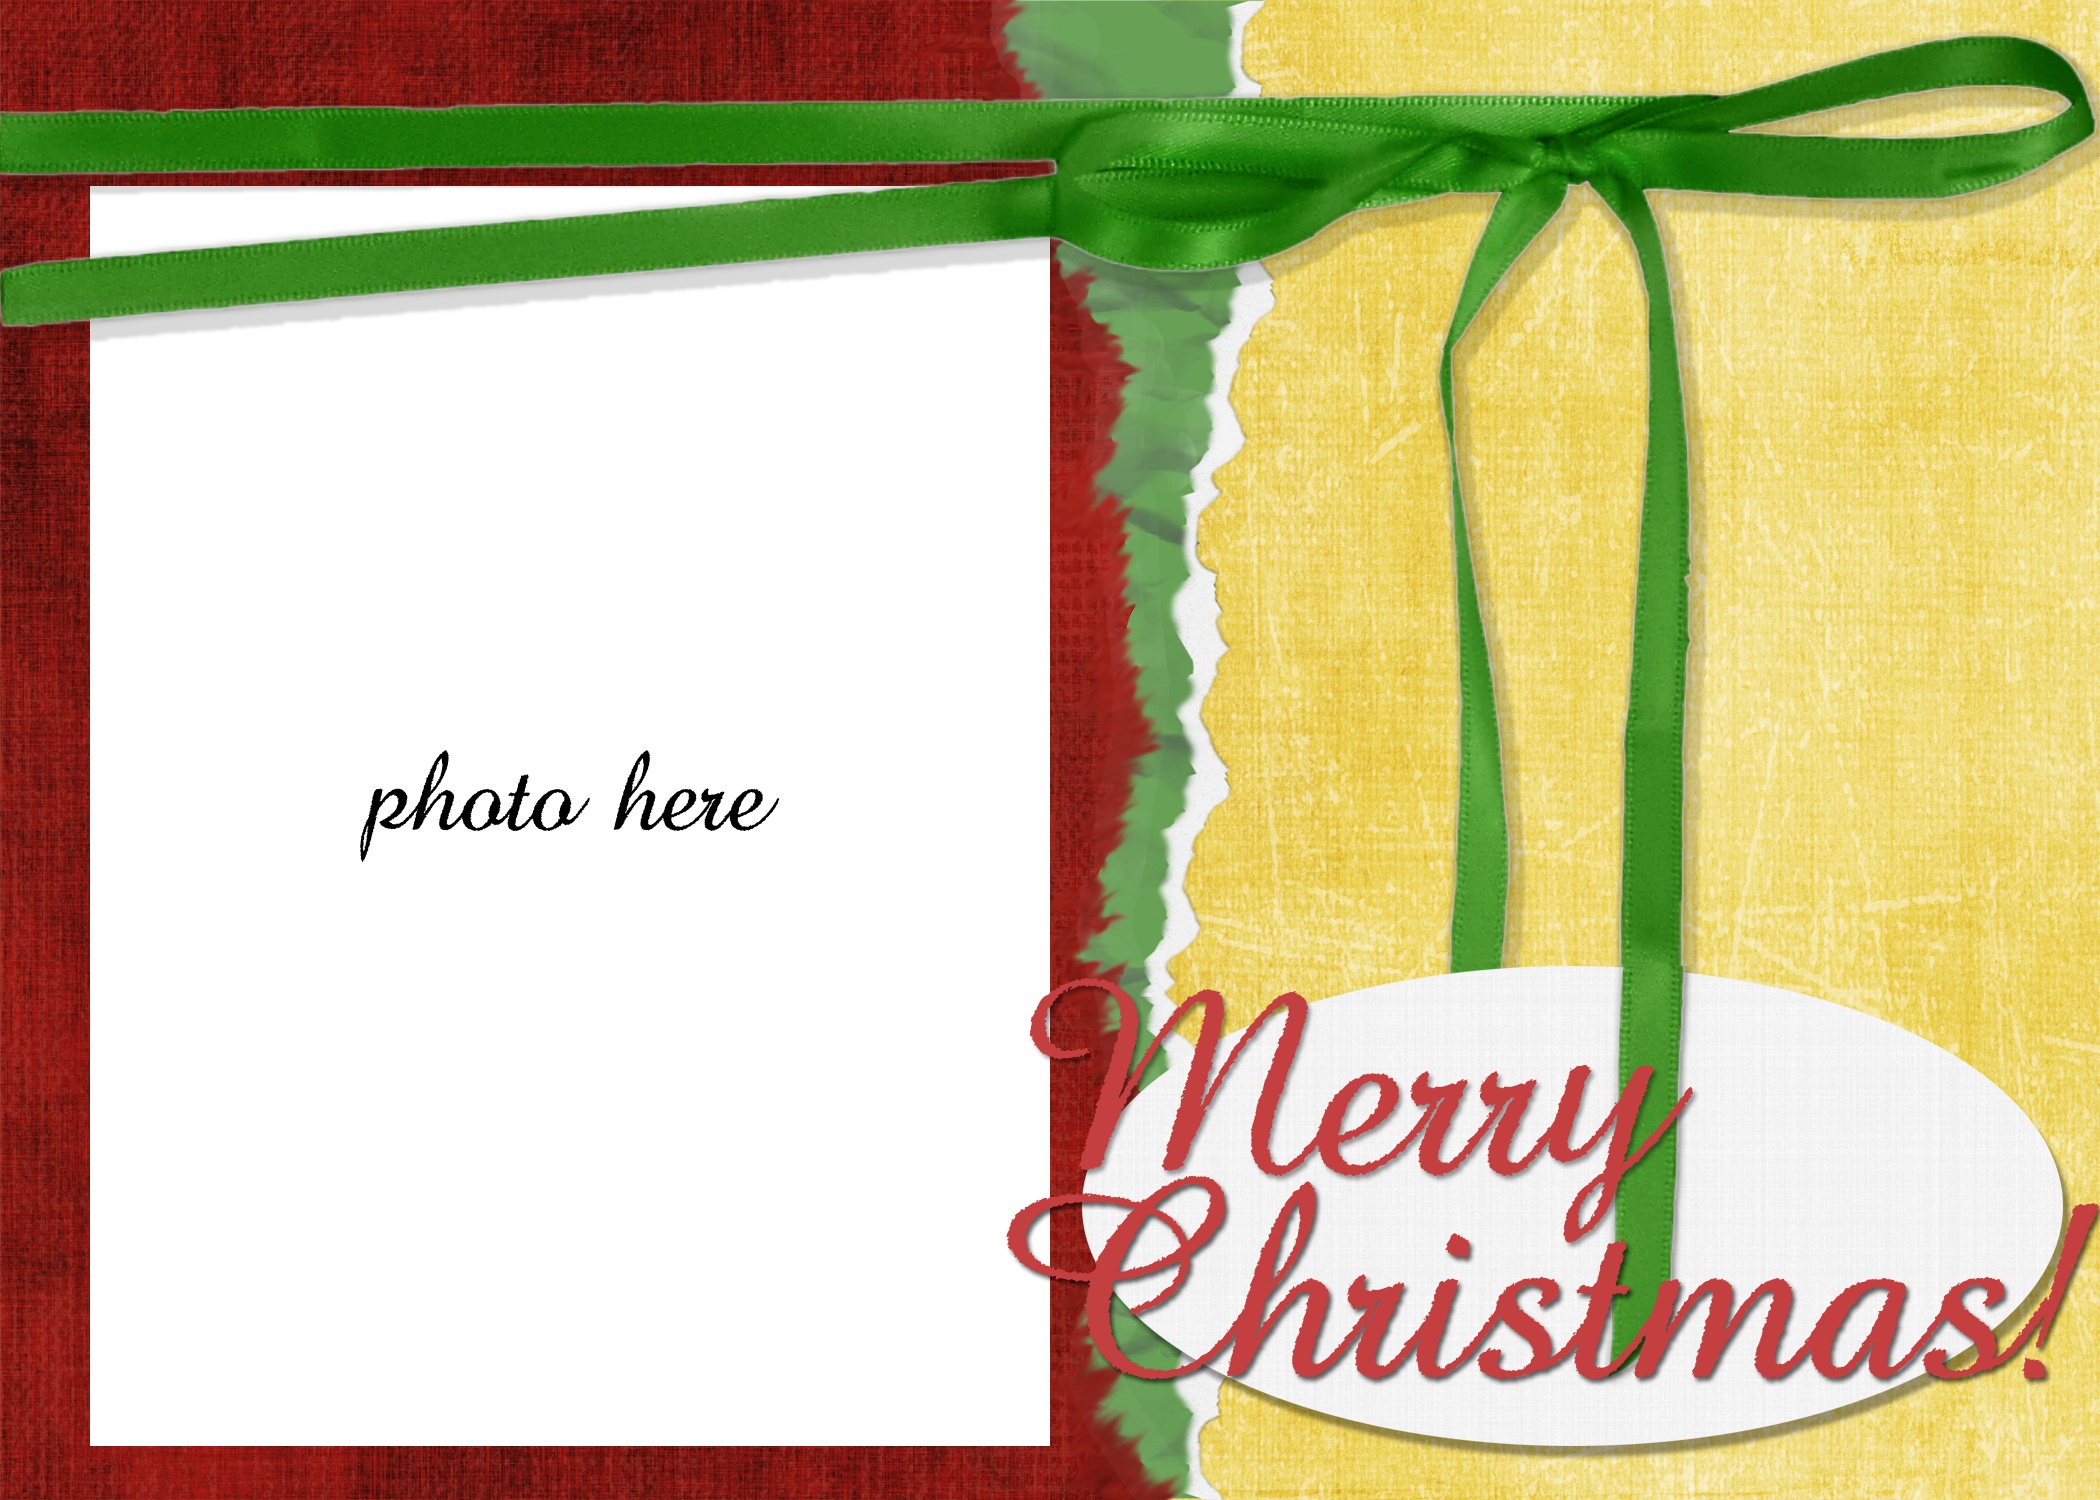 16 Holiday Greeting Card Template Images - Free Christmas Card - Free Online Christmas Photo Card Maker Printable